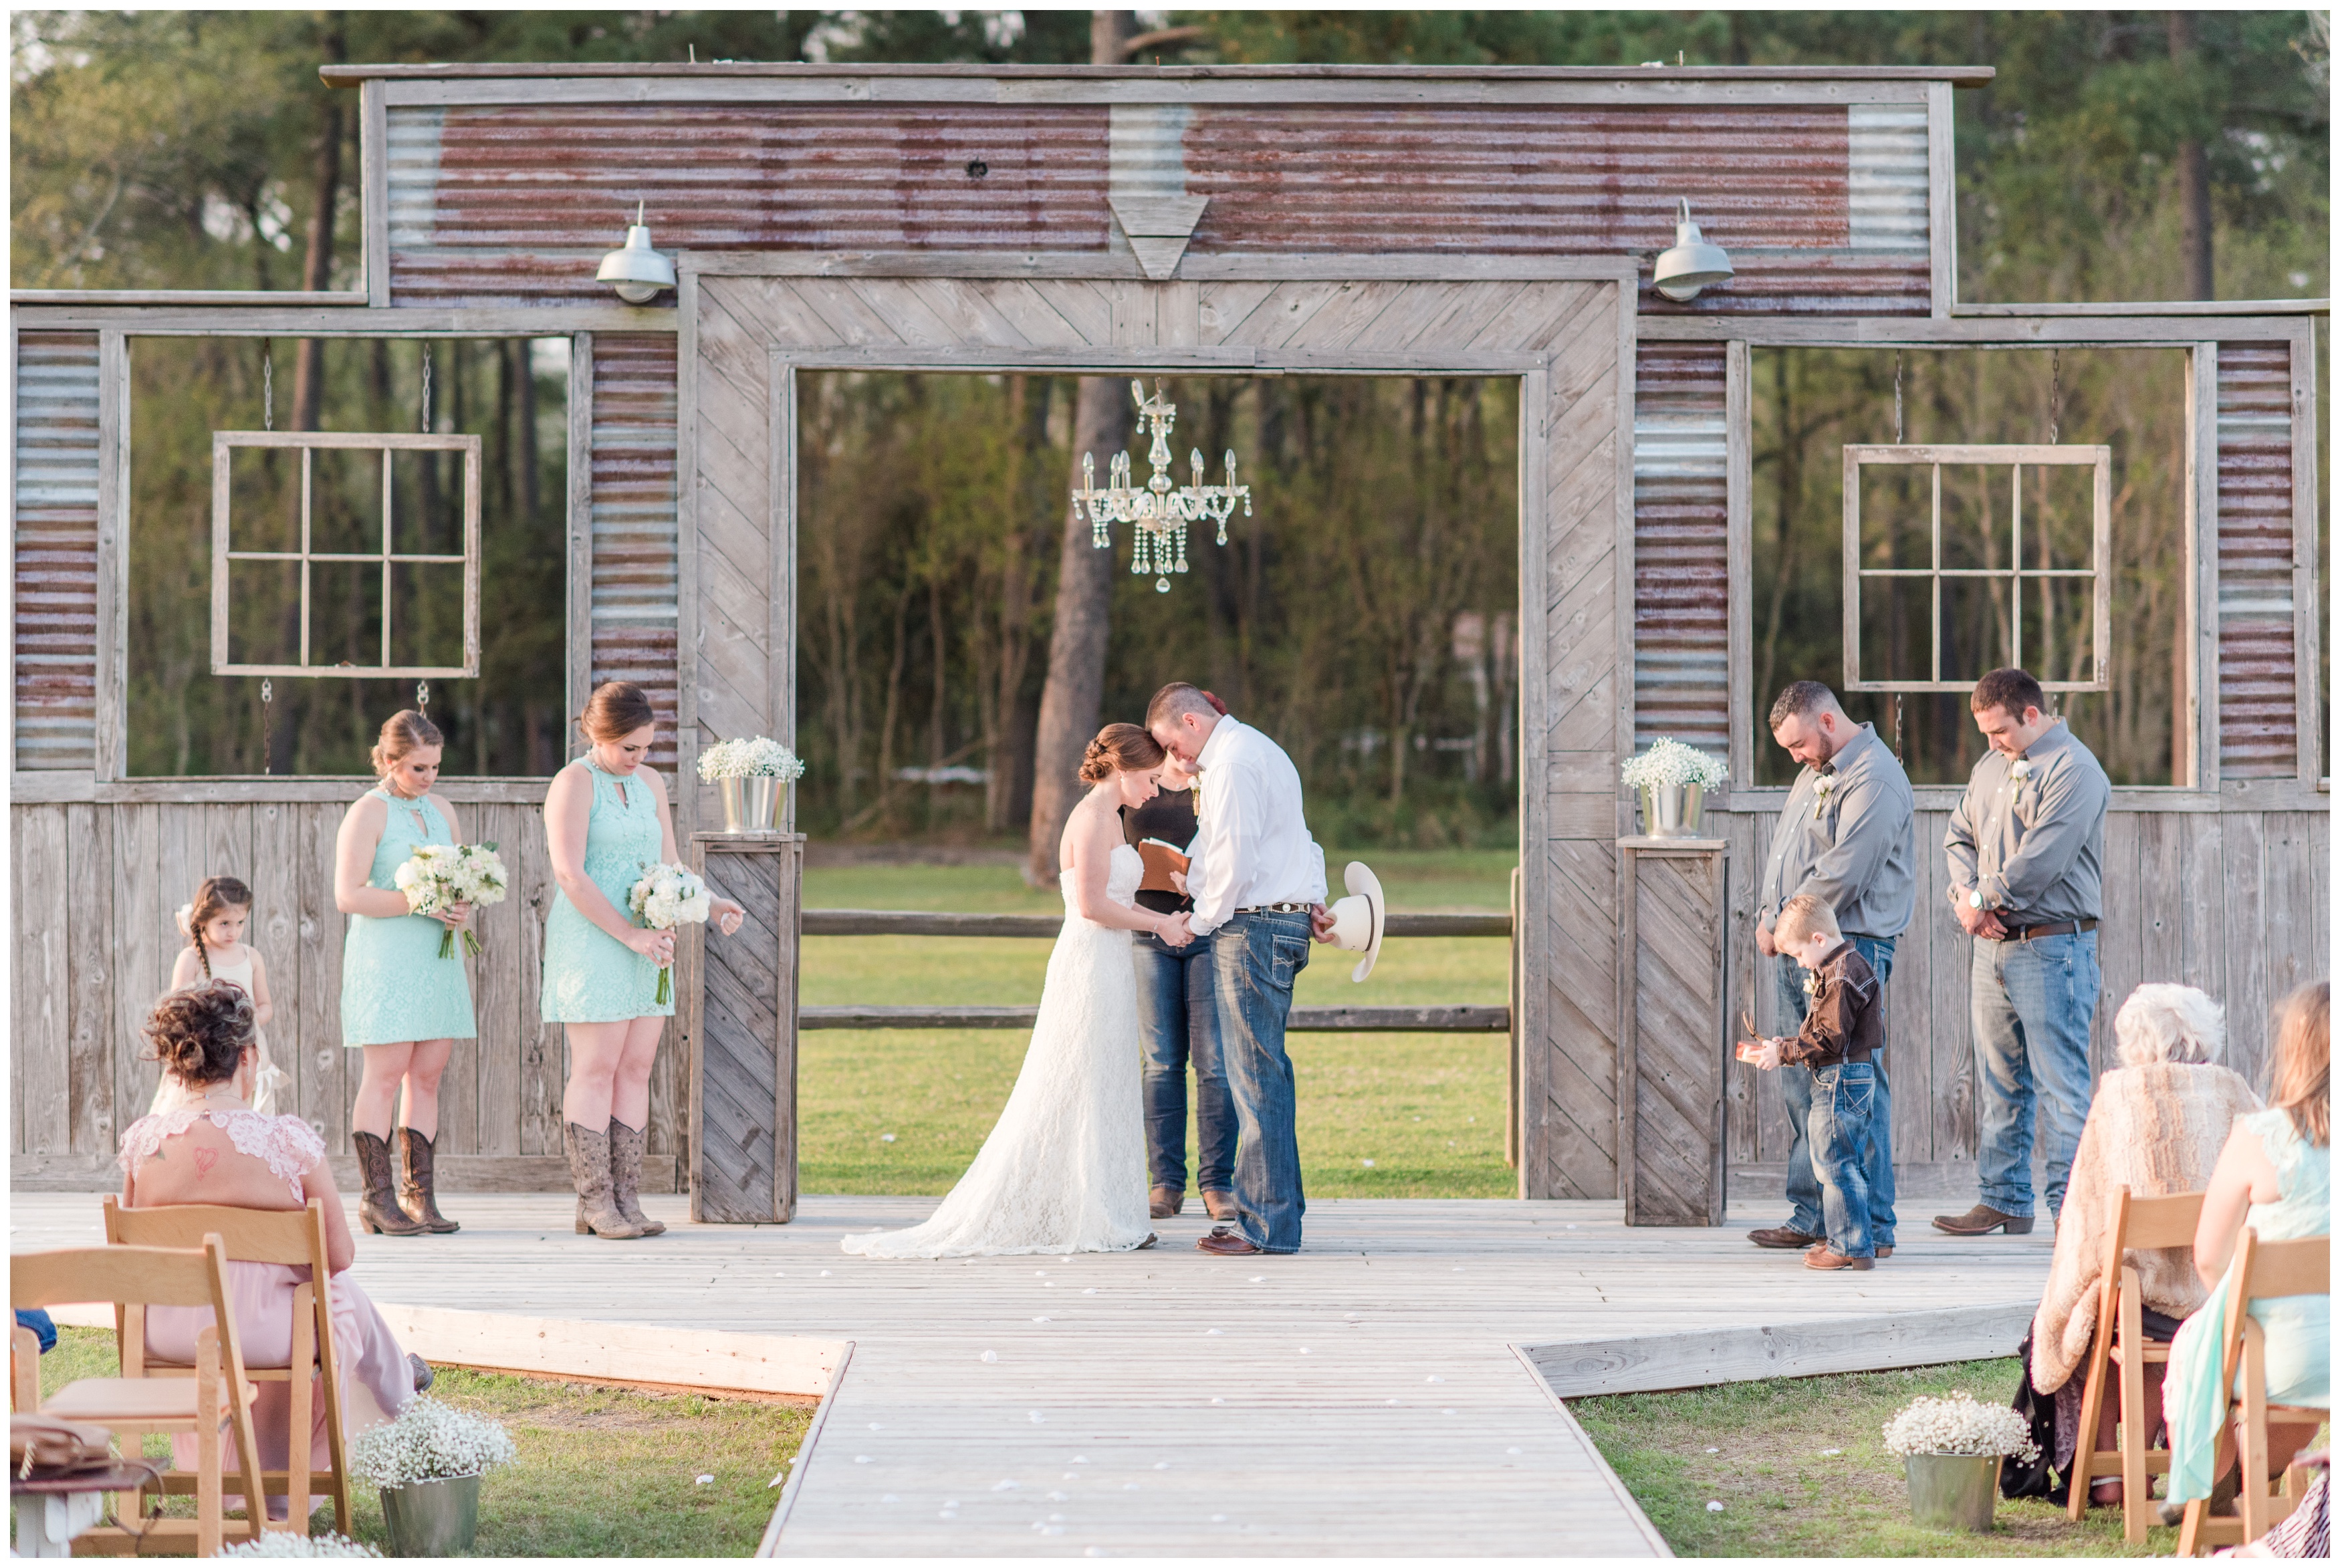 The Barn at Four Pines Wedding in Crosby TX - Kevin and Sammi_0349